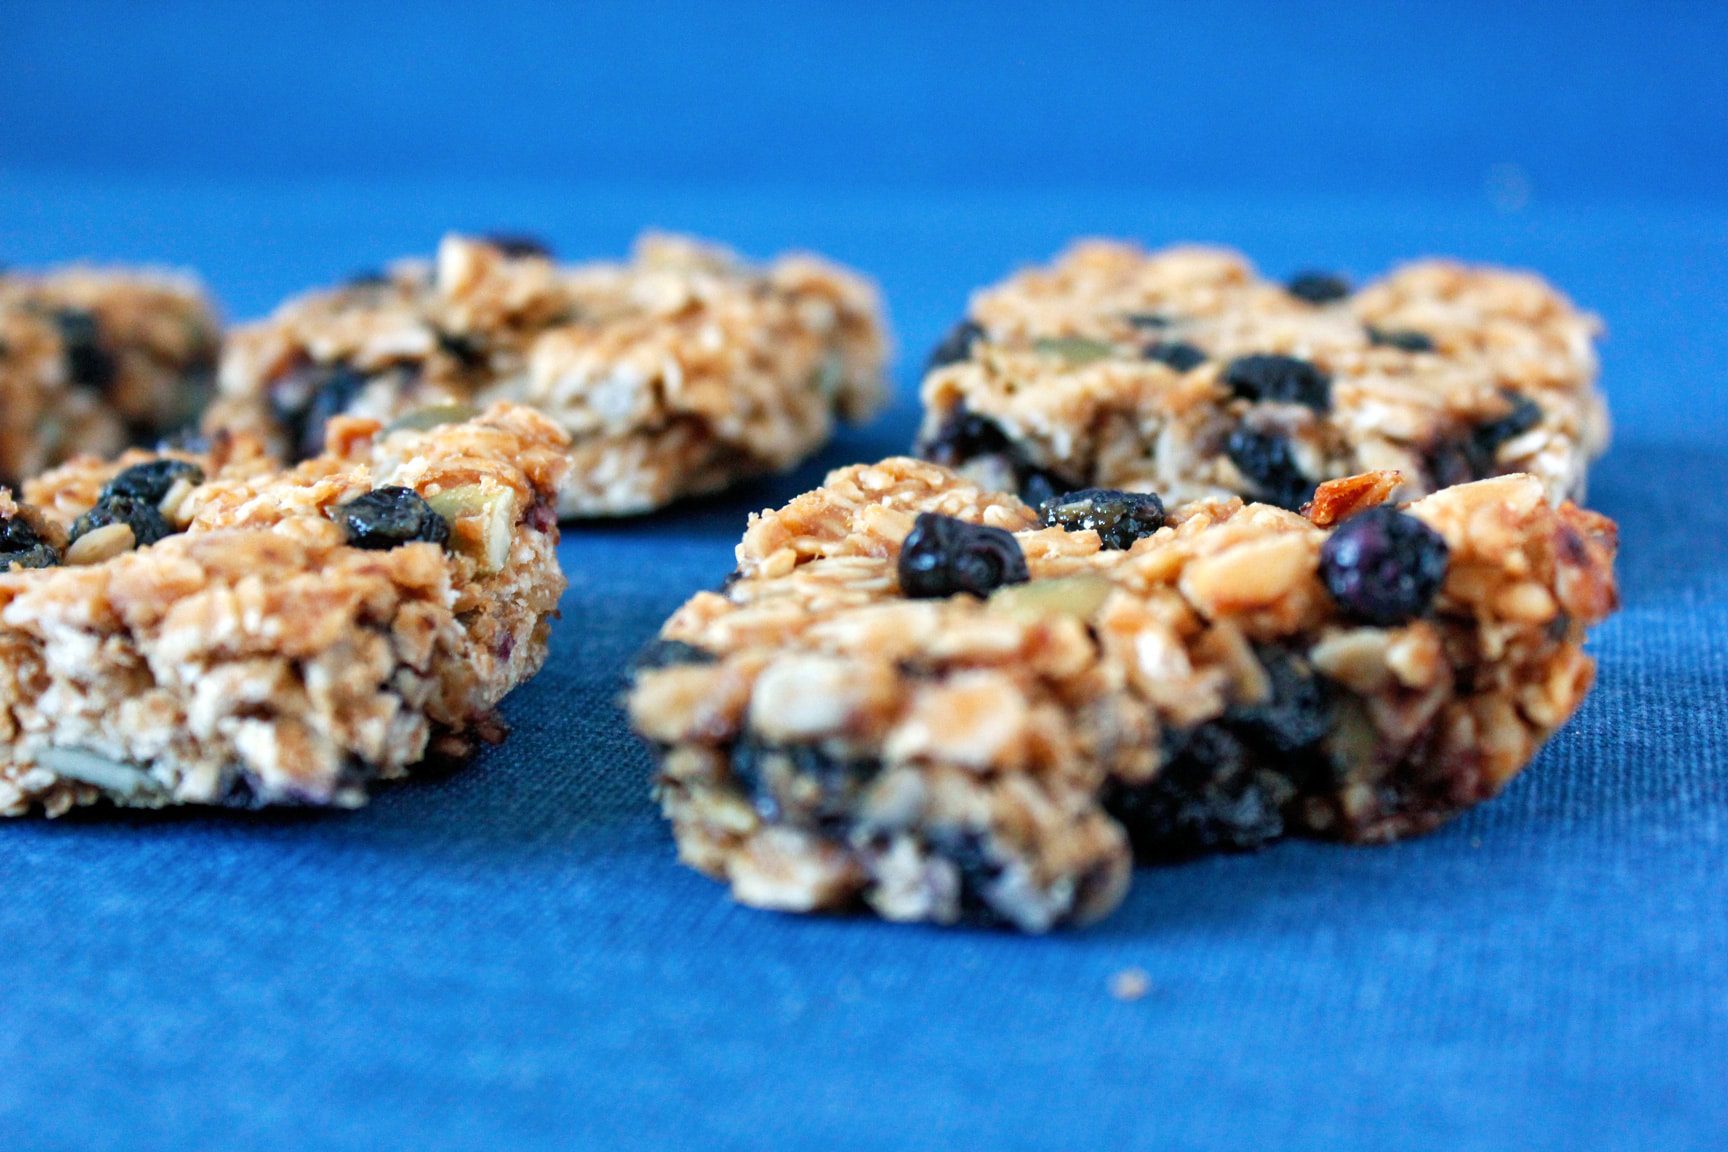 Blueberry Peanut Butter Bars by Bite-Sized Victories